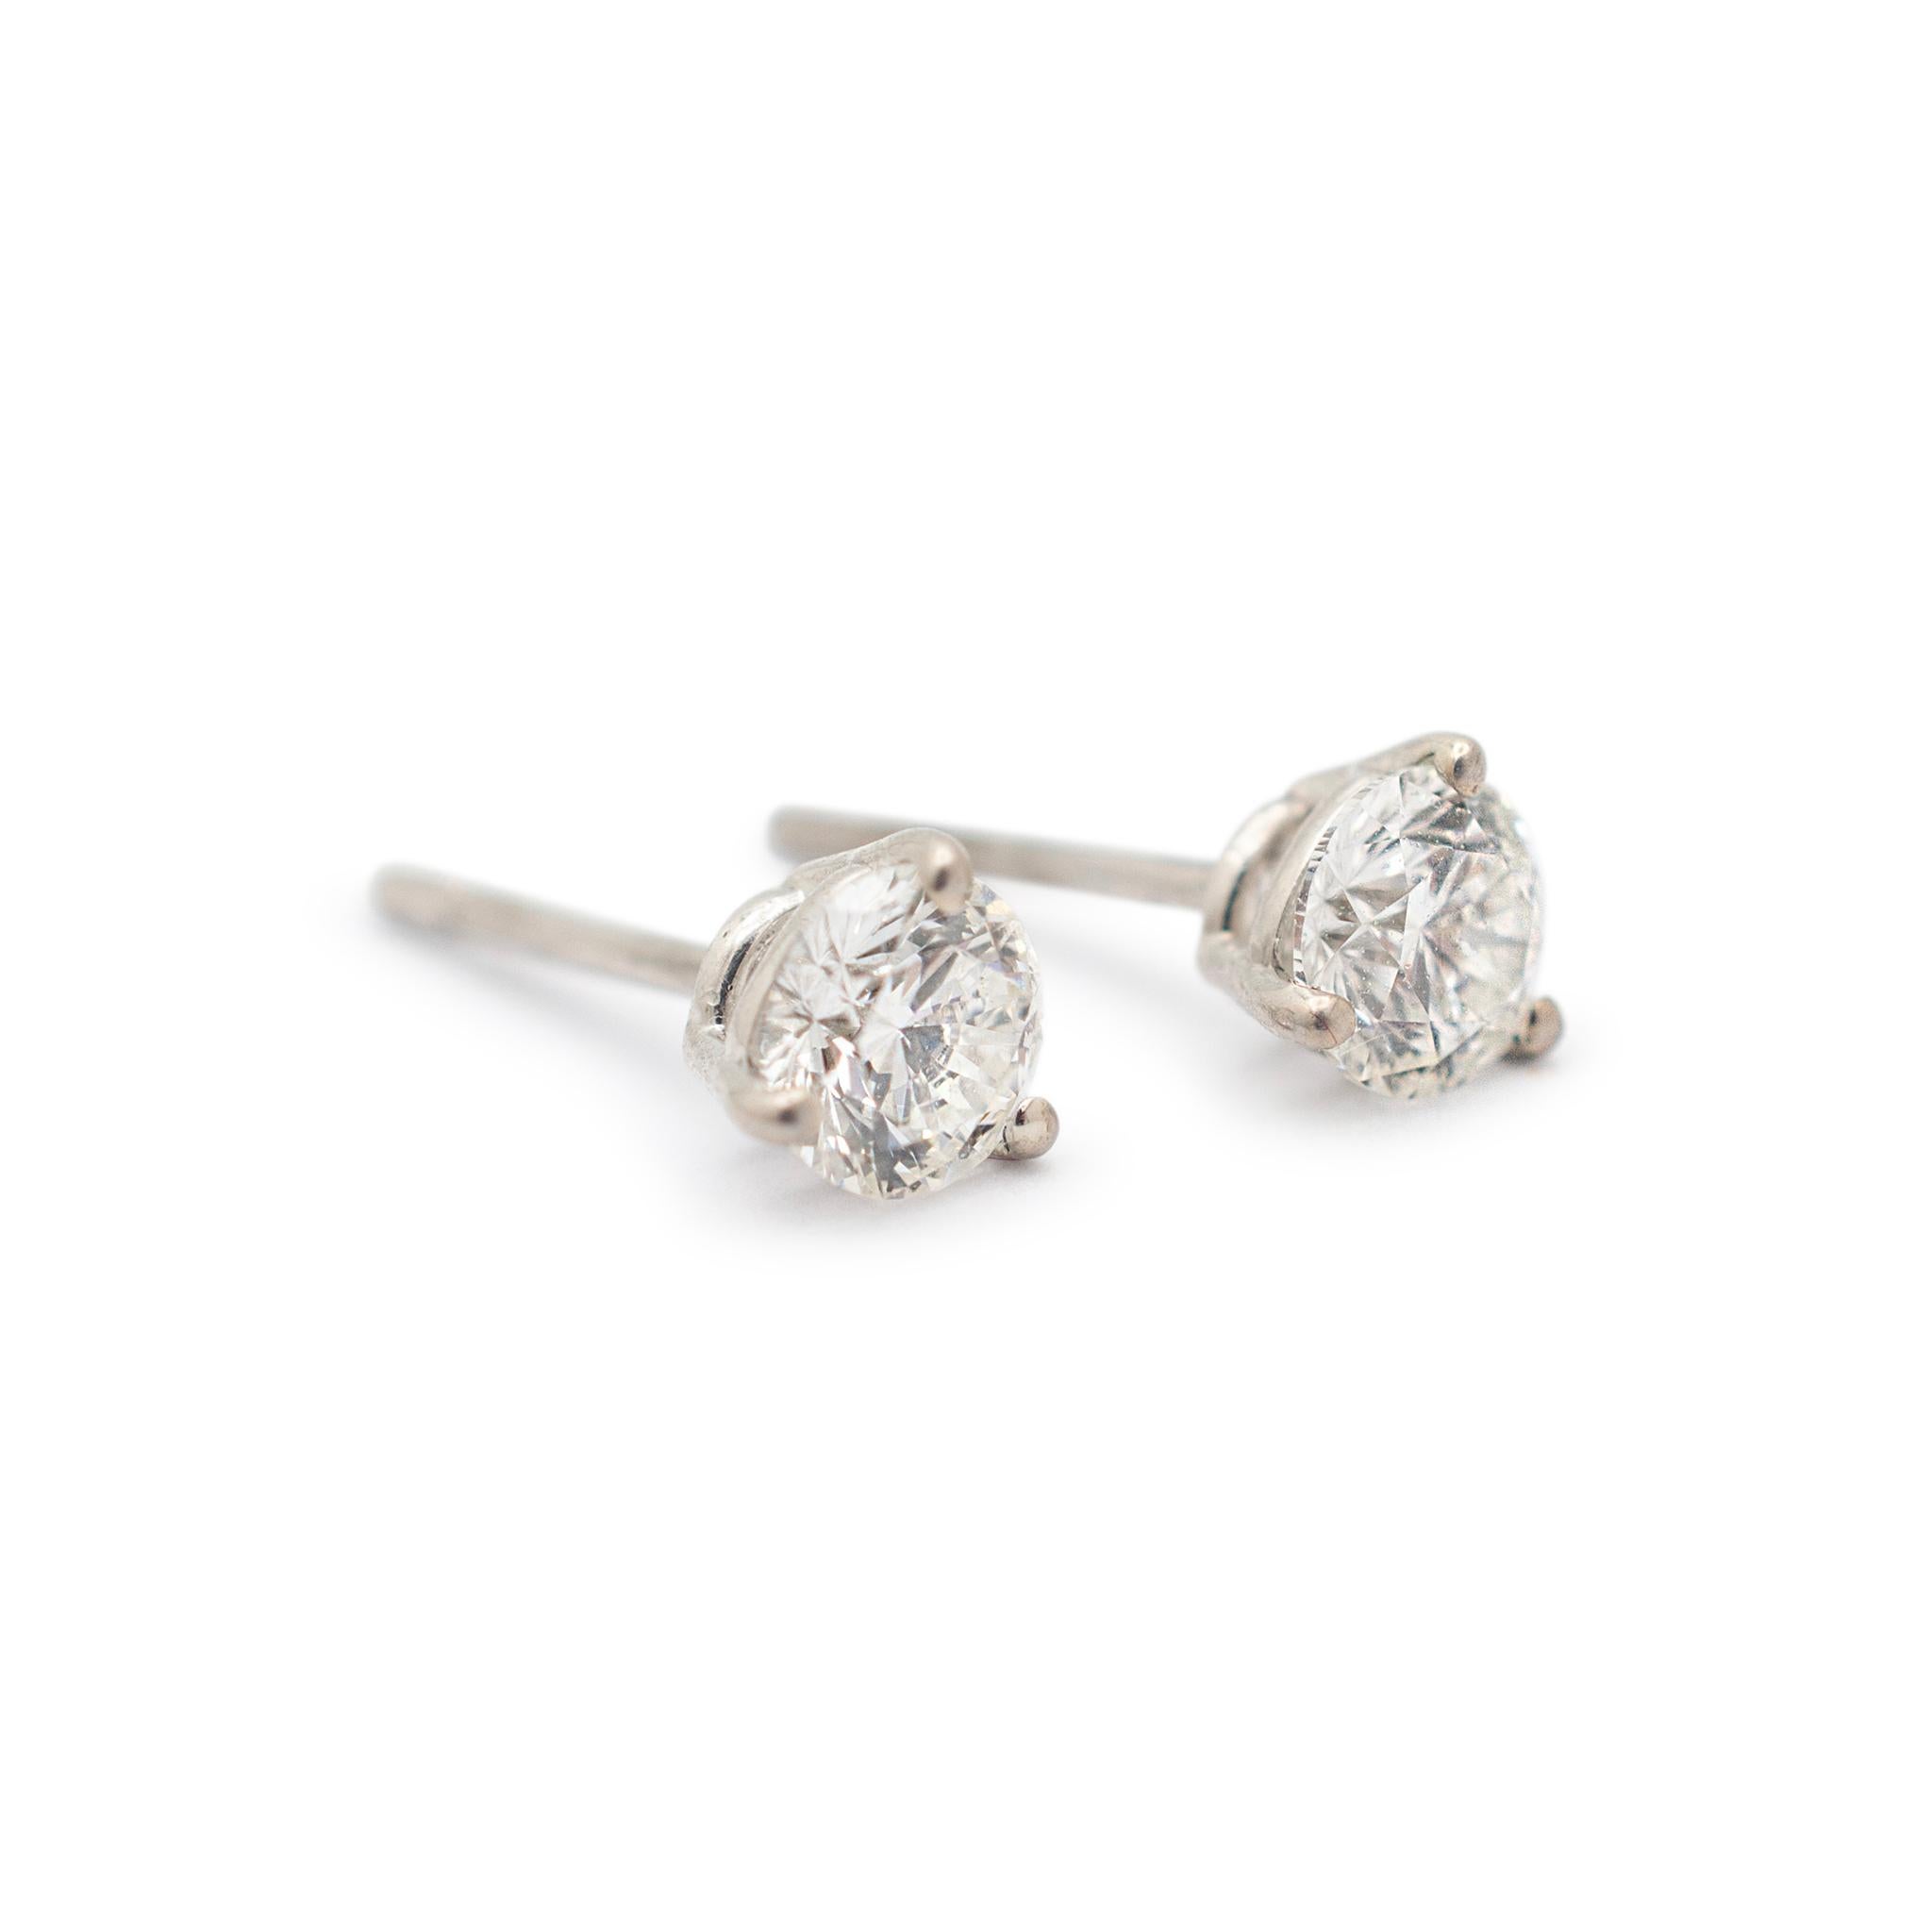 Ladies 18K White Gold Push Back Martini 0.79CT Diamond Stud Earring In Excellent Condition For Sale In Houston, TX